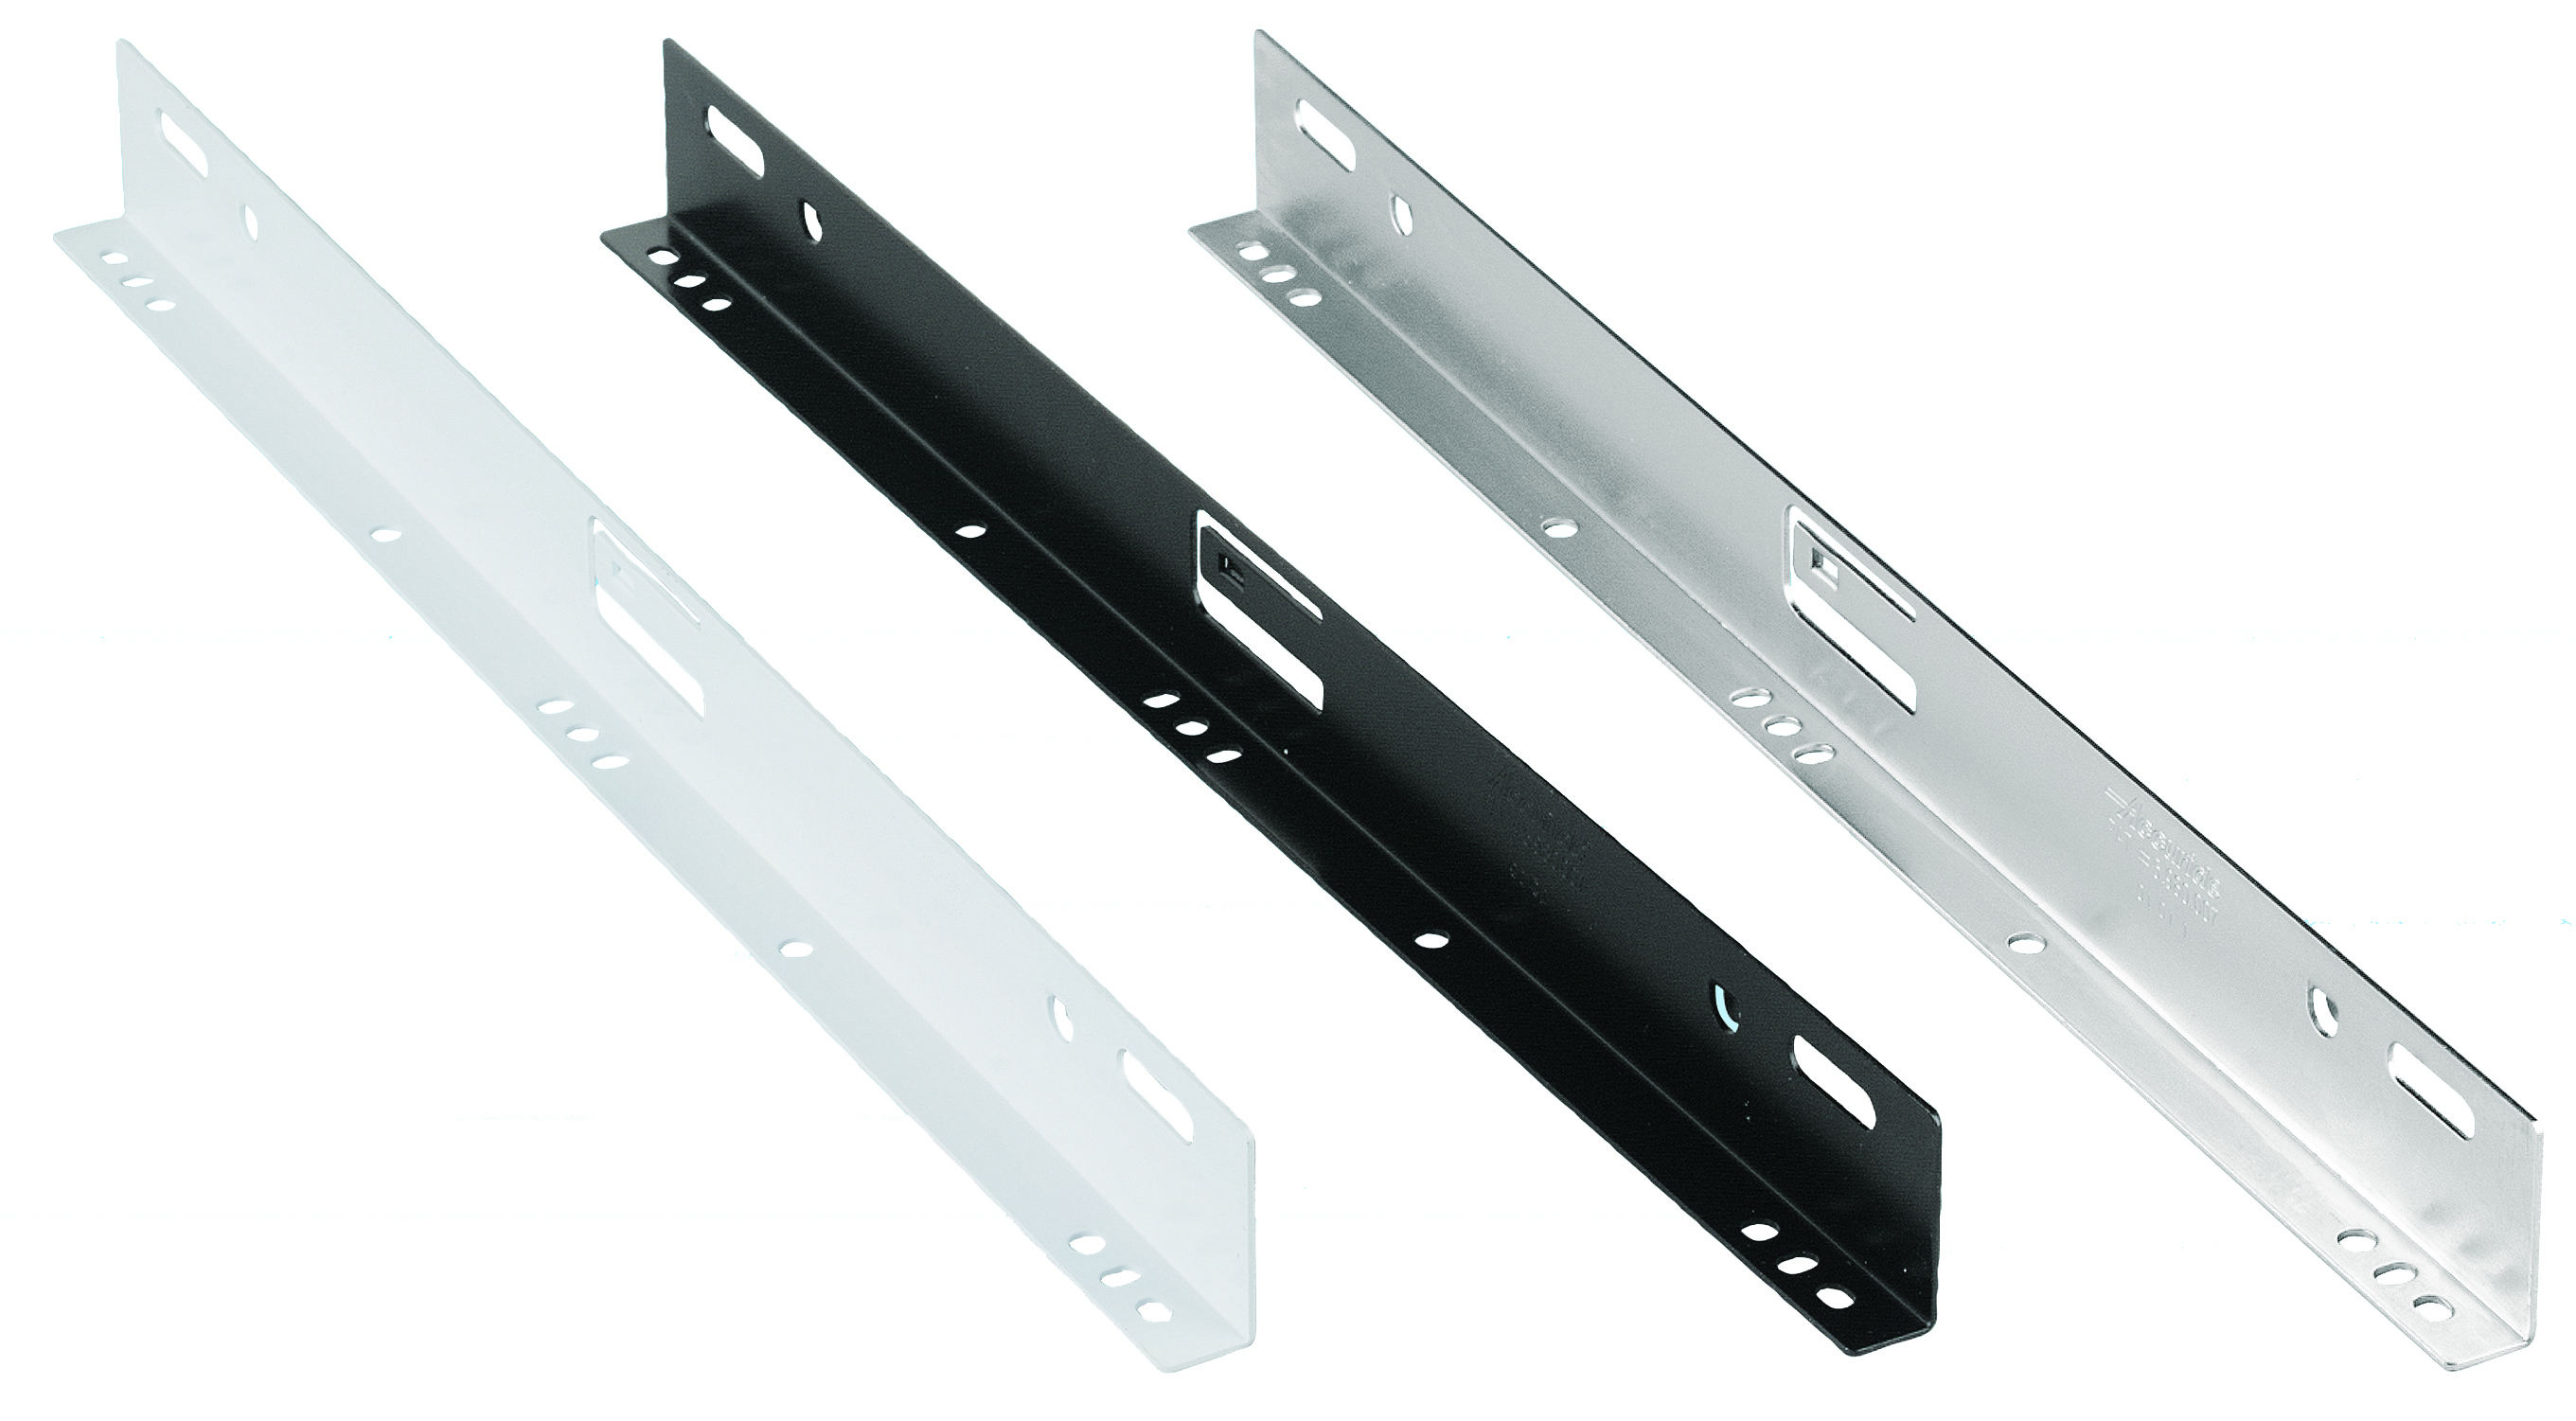 Accuride 633 mounting bracket